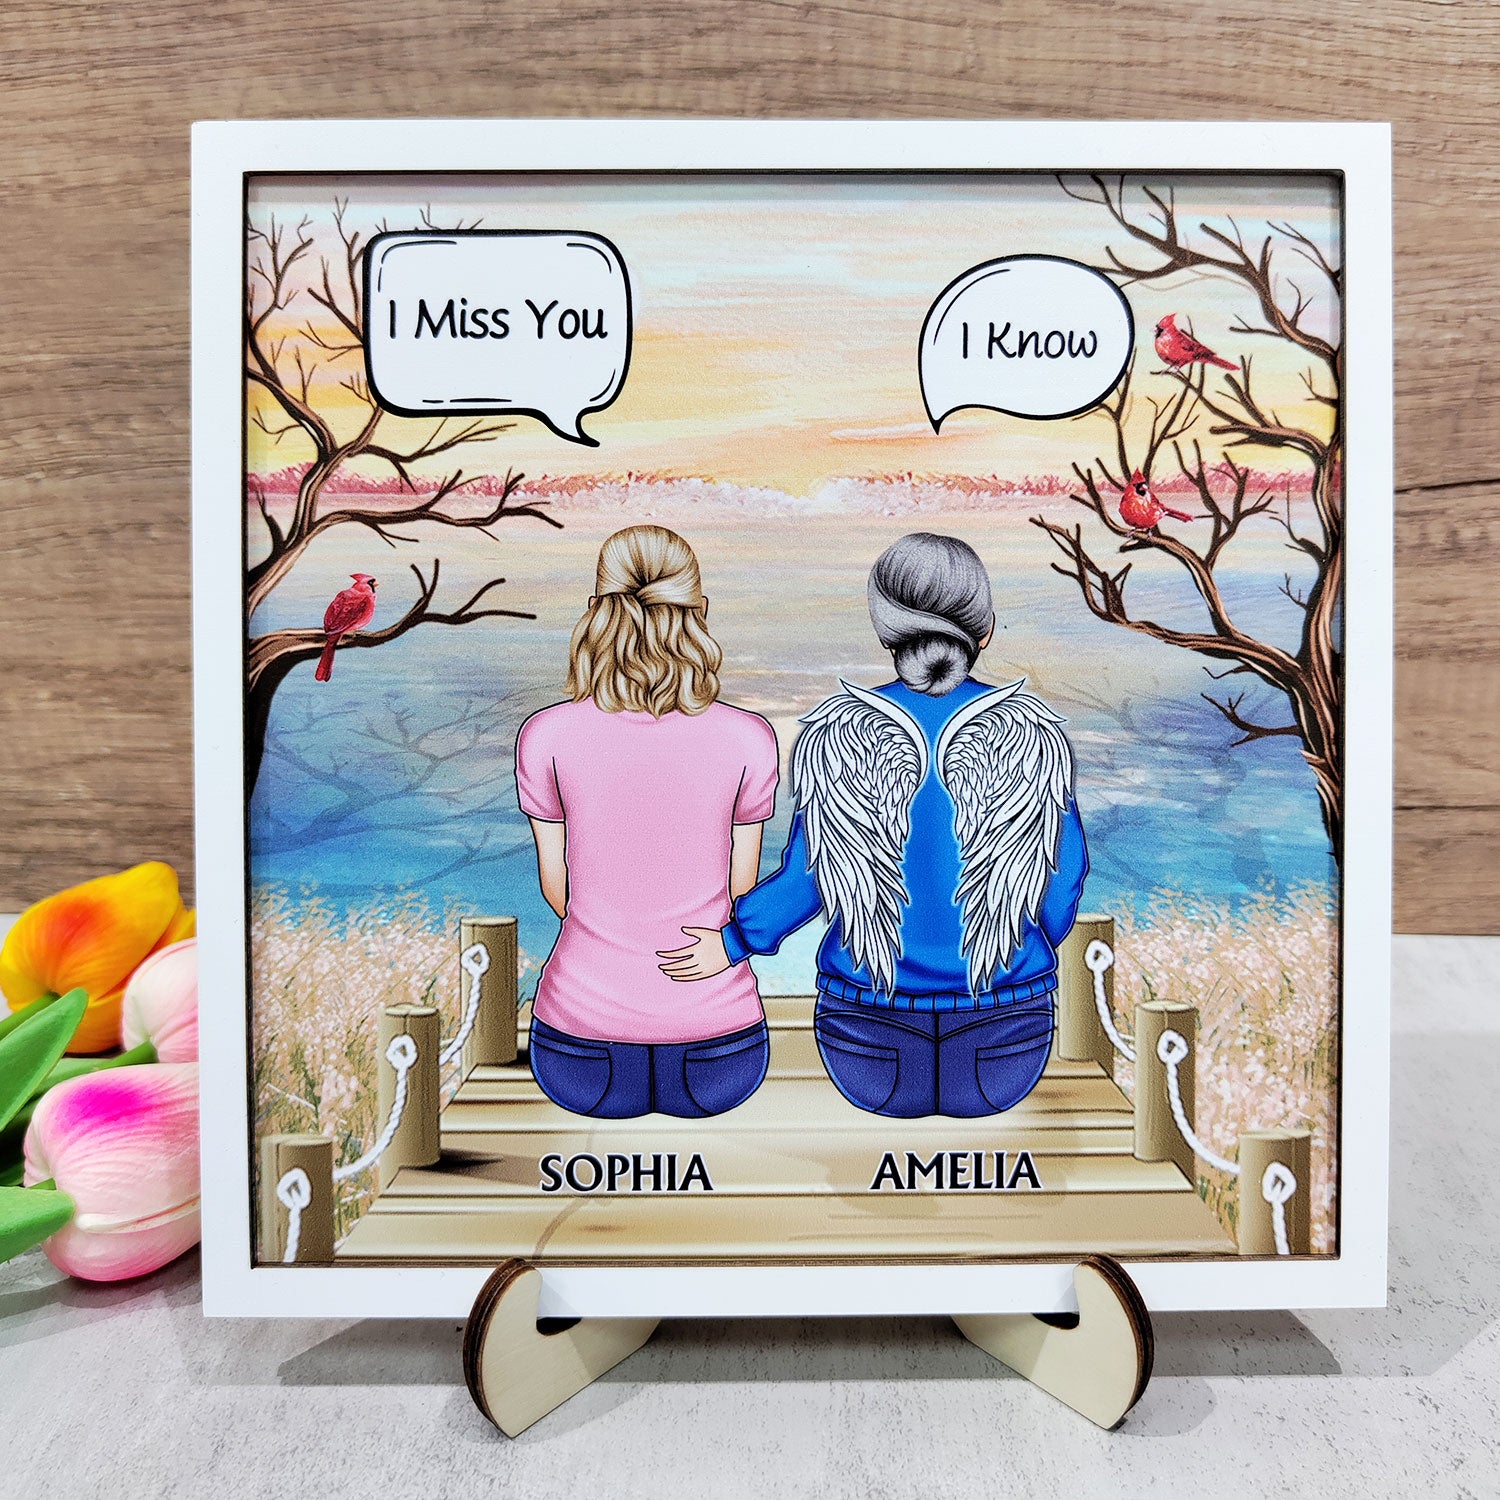 I Miss You I Know - Memorial Gift For Family, Friends, Siblings - Personalized 2-Layered Wooden Plaque With Stand